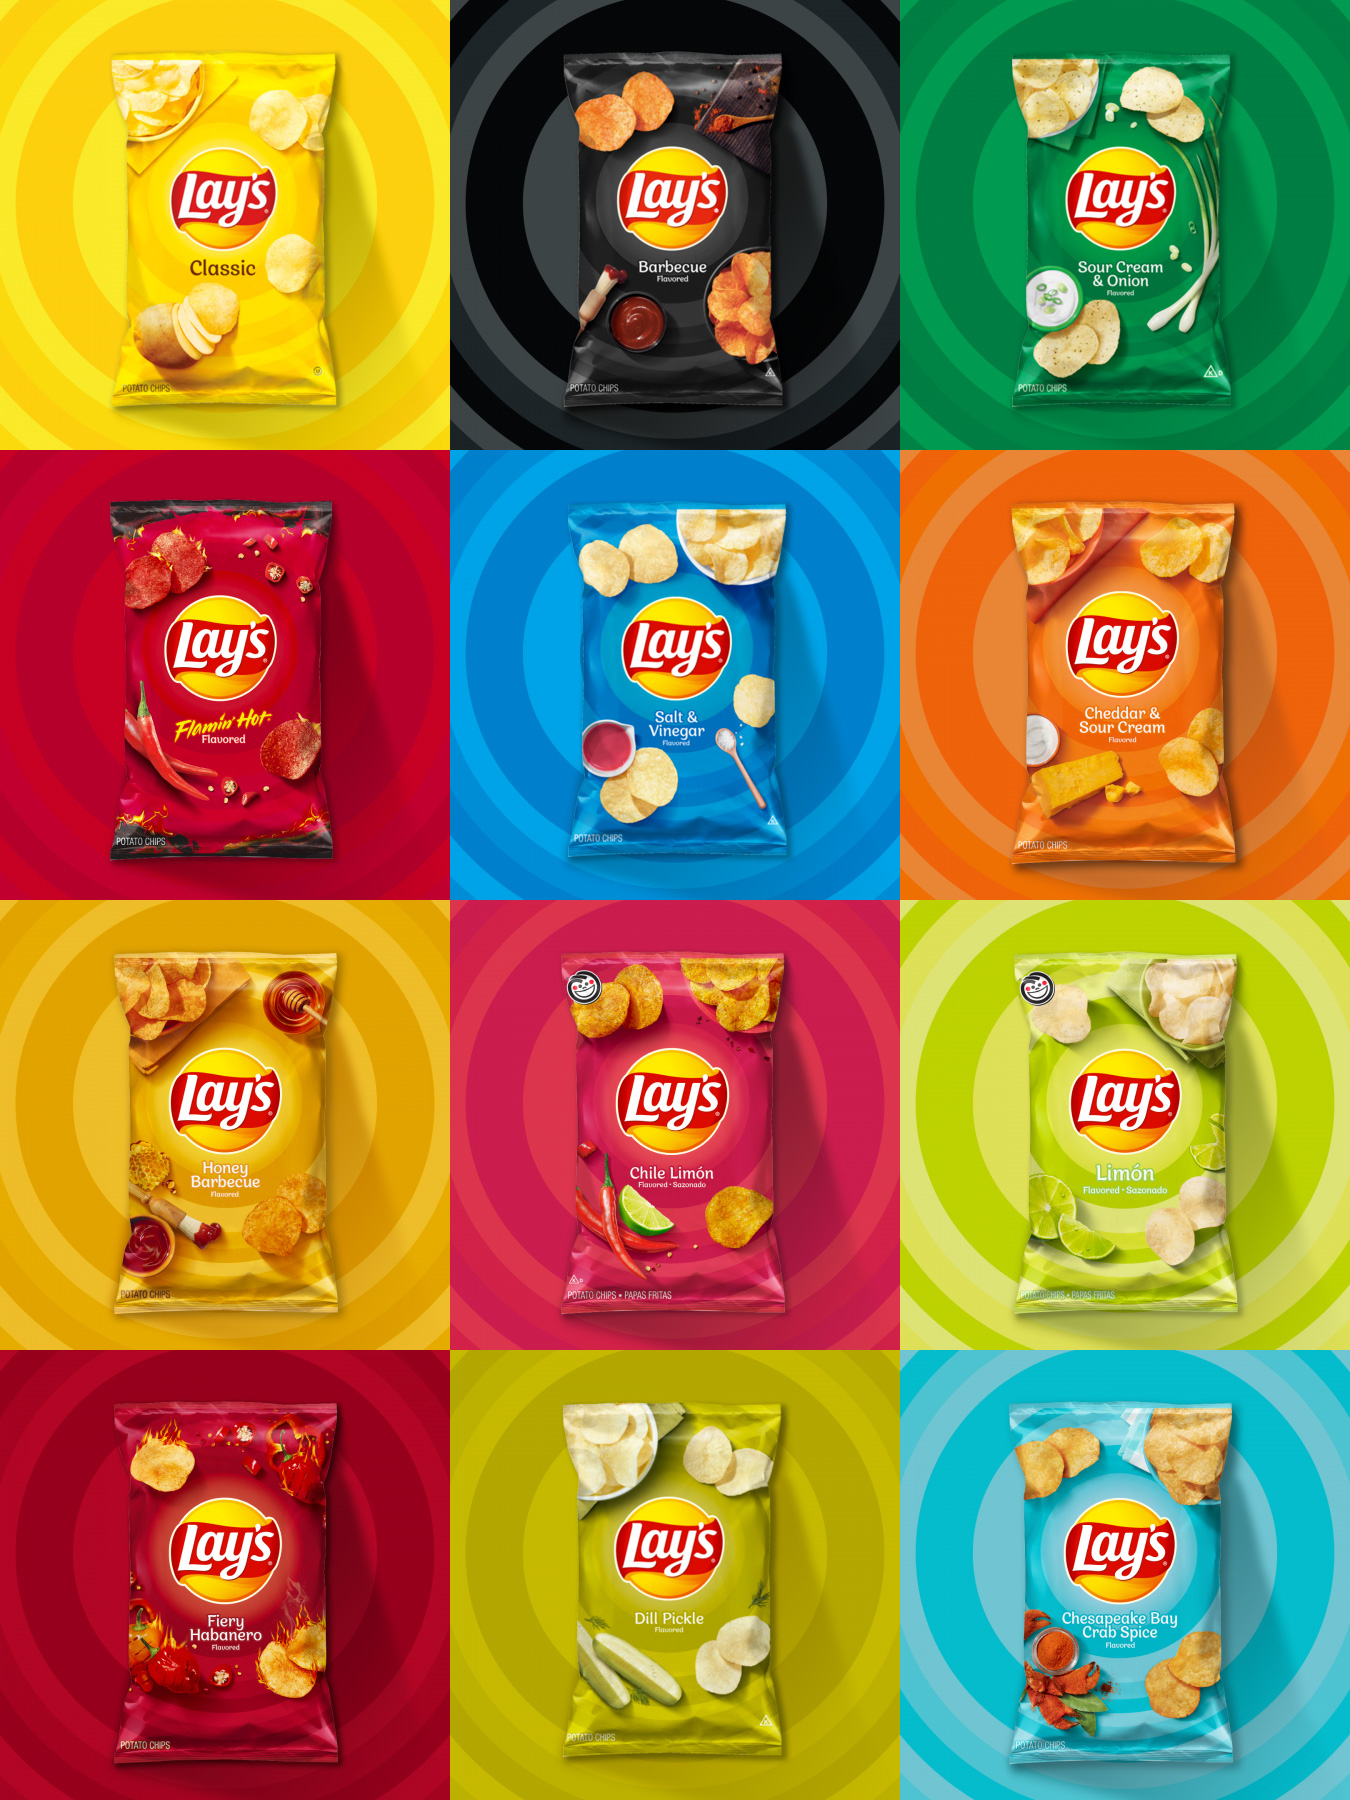 New Logo and Packaging for Lay's